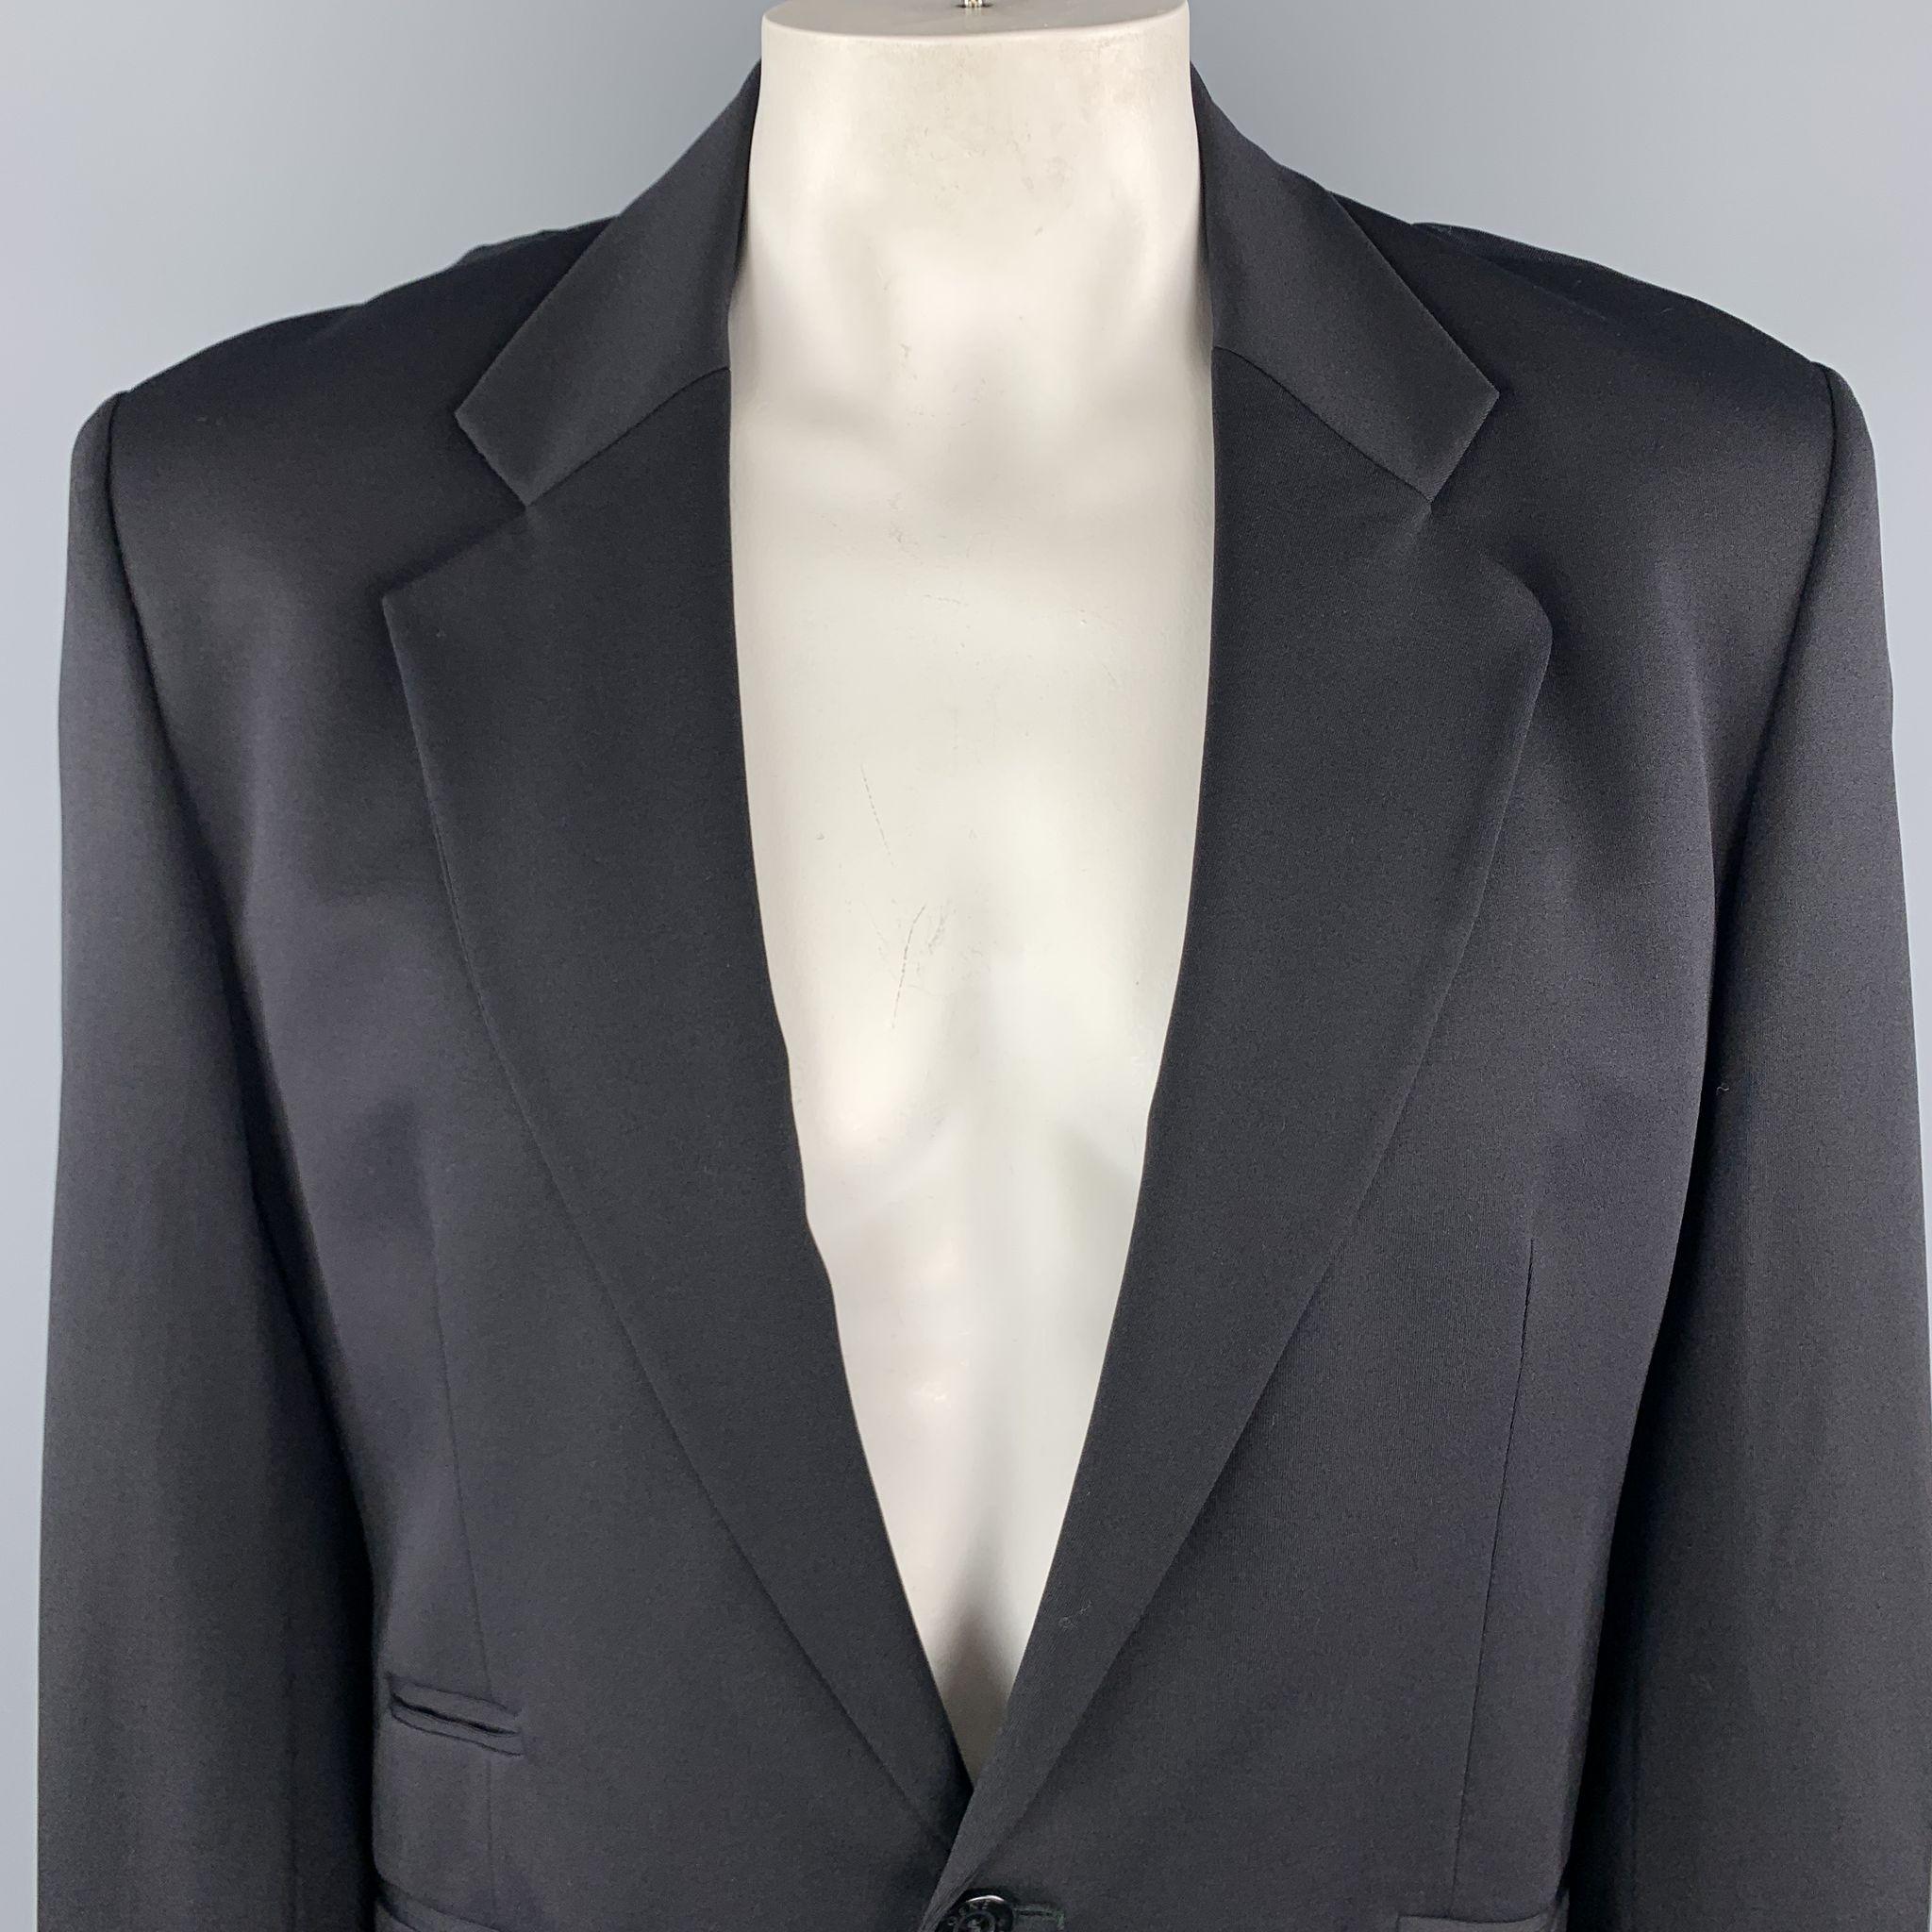 GENE MEYER Sport Coat comes in a black nylon blend material, with a notch lapel, slit pockets, a single button at closure, single breasted, unbuttoned cuffs and a single vent at back. Made in Italy.

Excellent Pre-Owned Condition.
Marked: